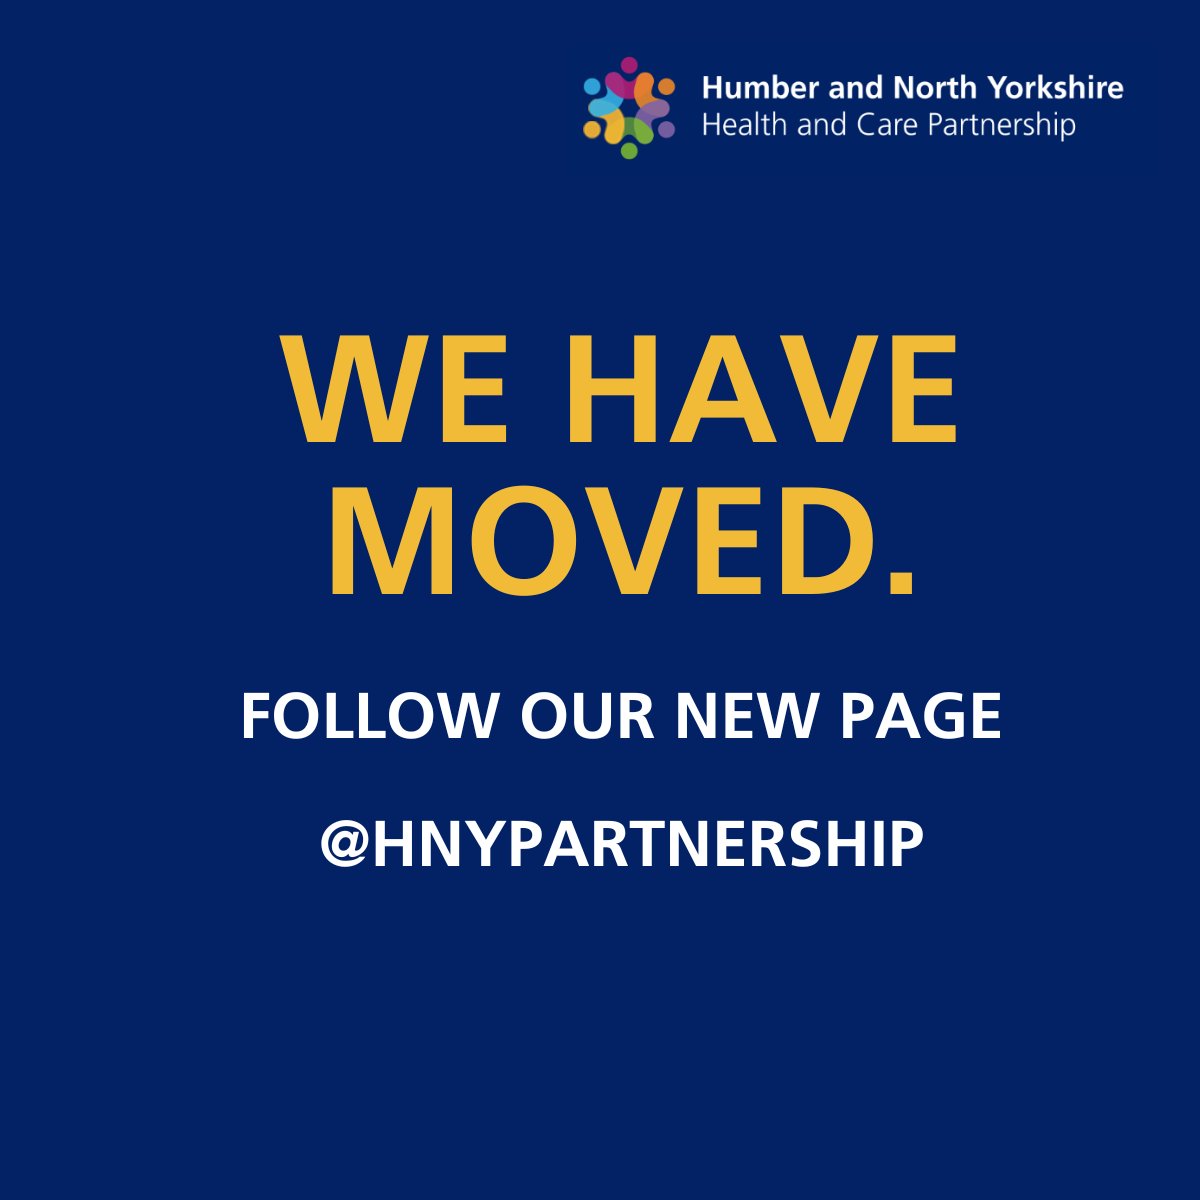 In the coming days, this page is migrating to Humber and North Yorkshire Health & Care Partnership and Integrated Care Board (ICB) page. The ICB has responsibility for commissioning healthcare services of the former CCG's - follow @HNYPartnership